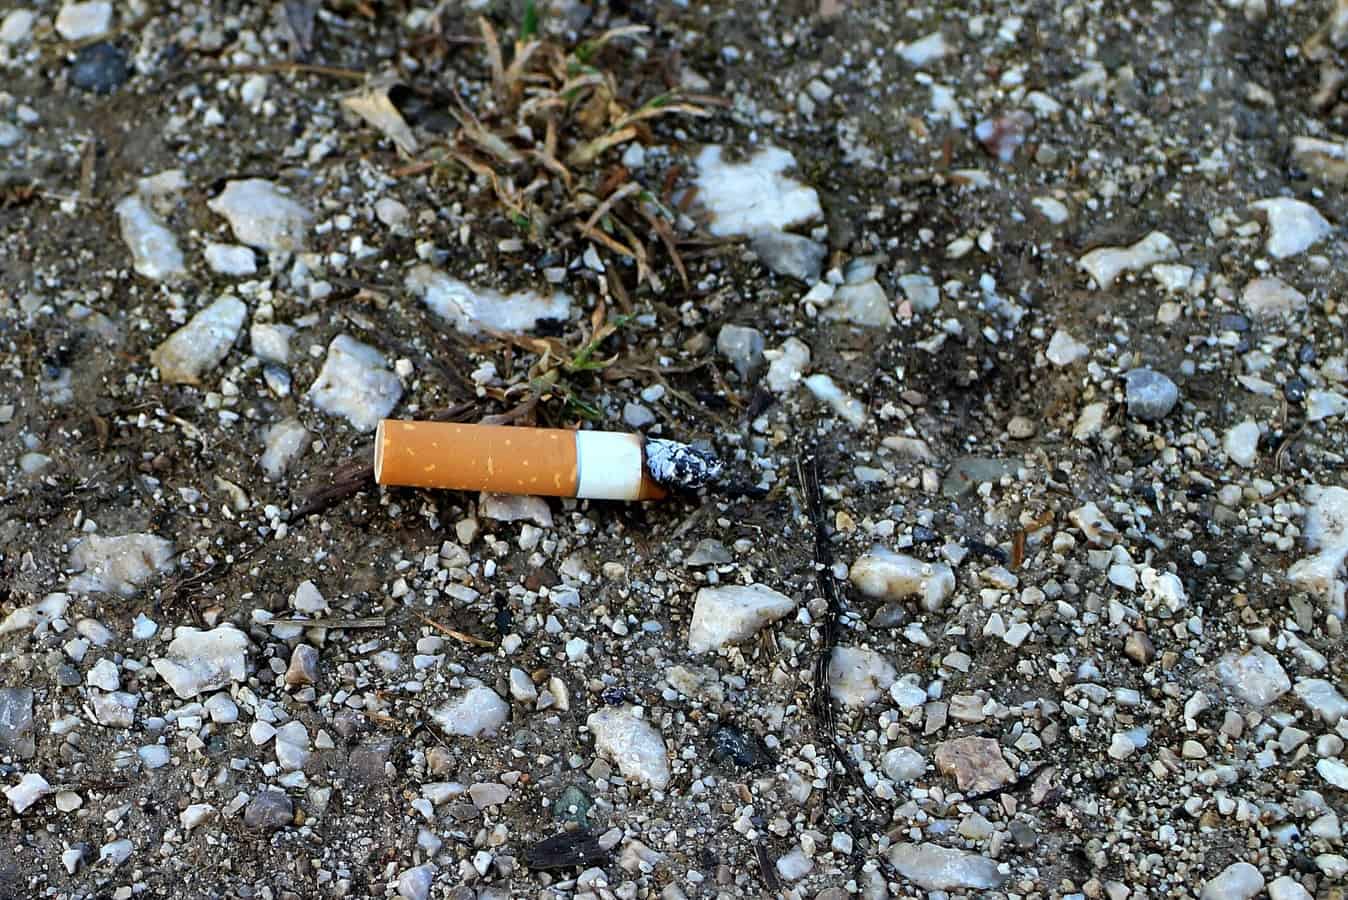 discarded cigarette butt on ground